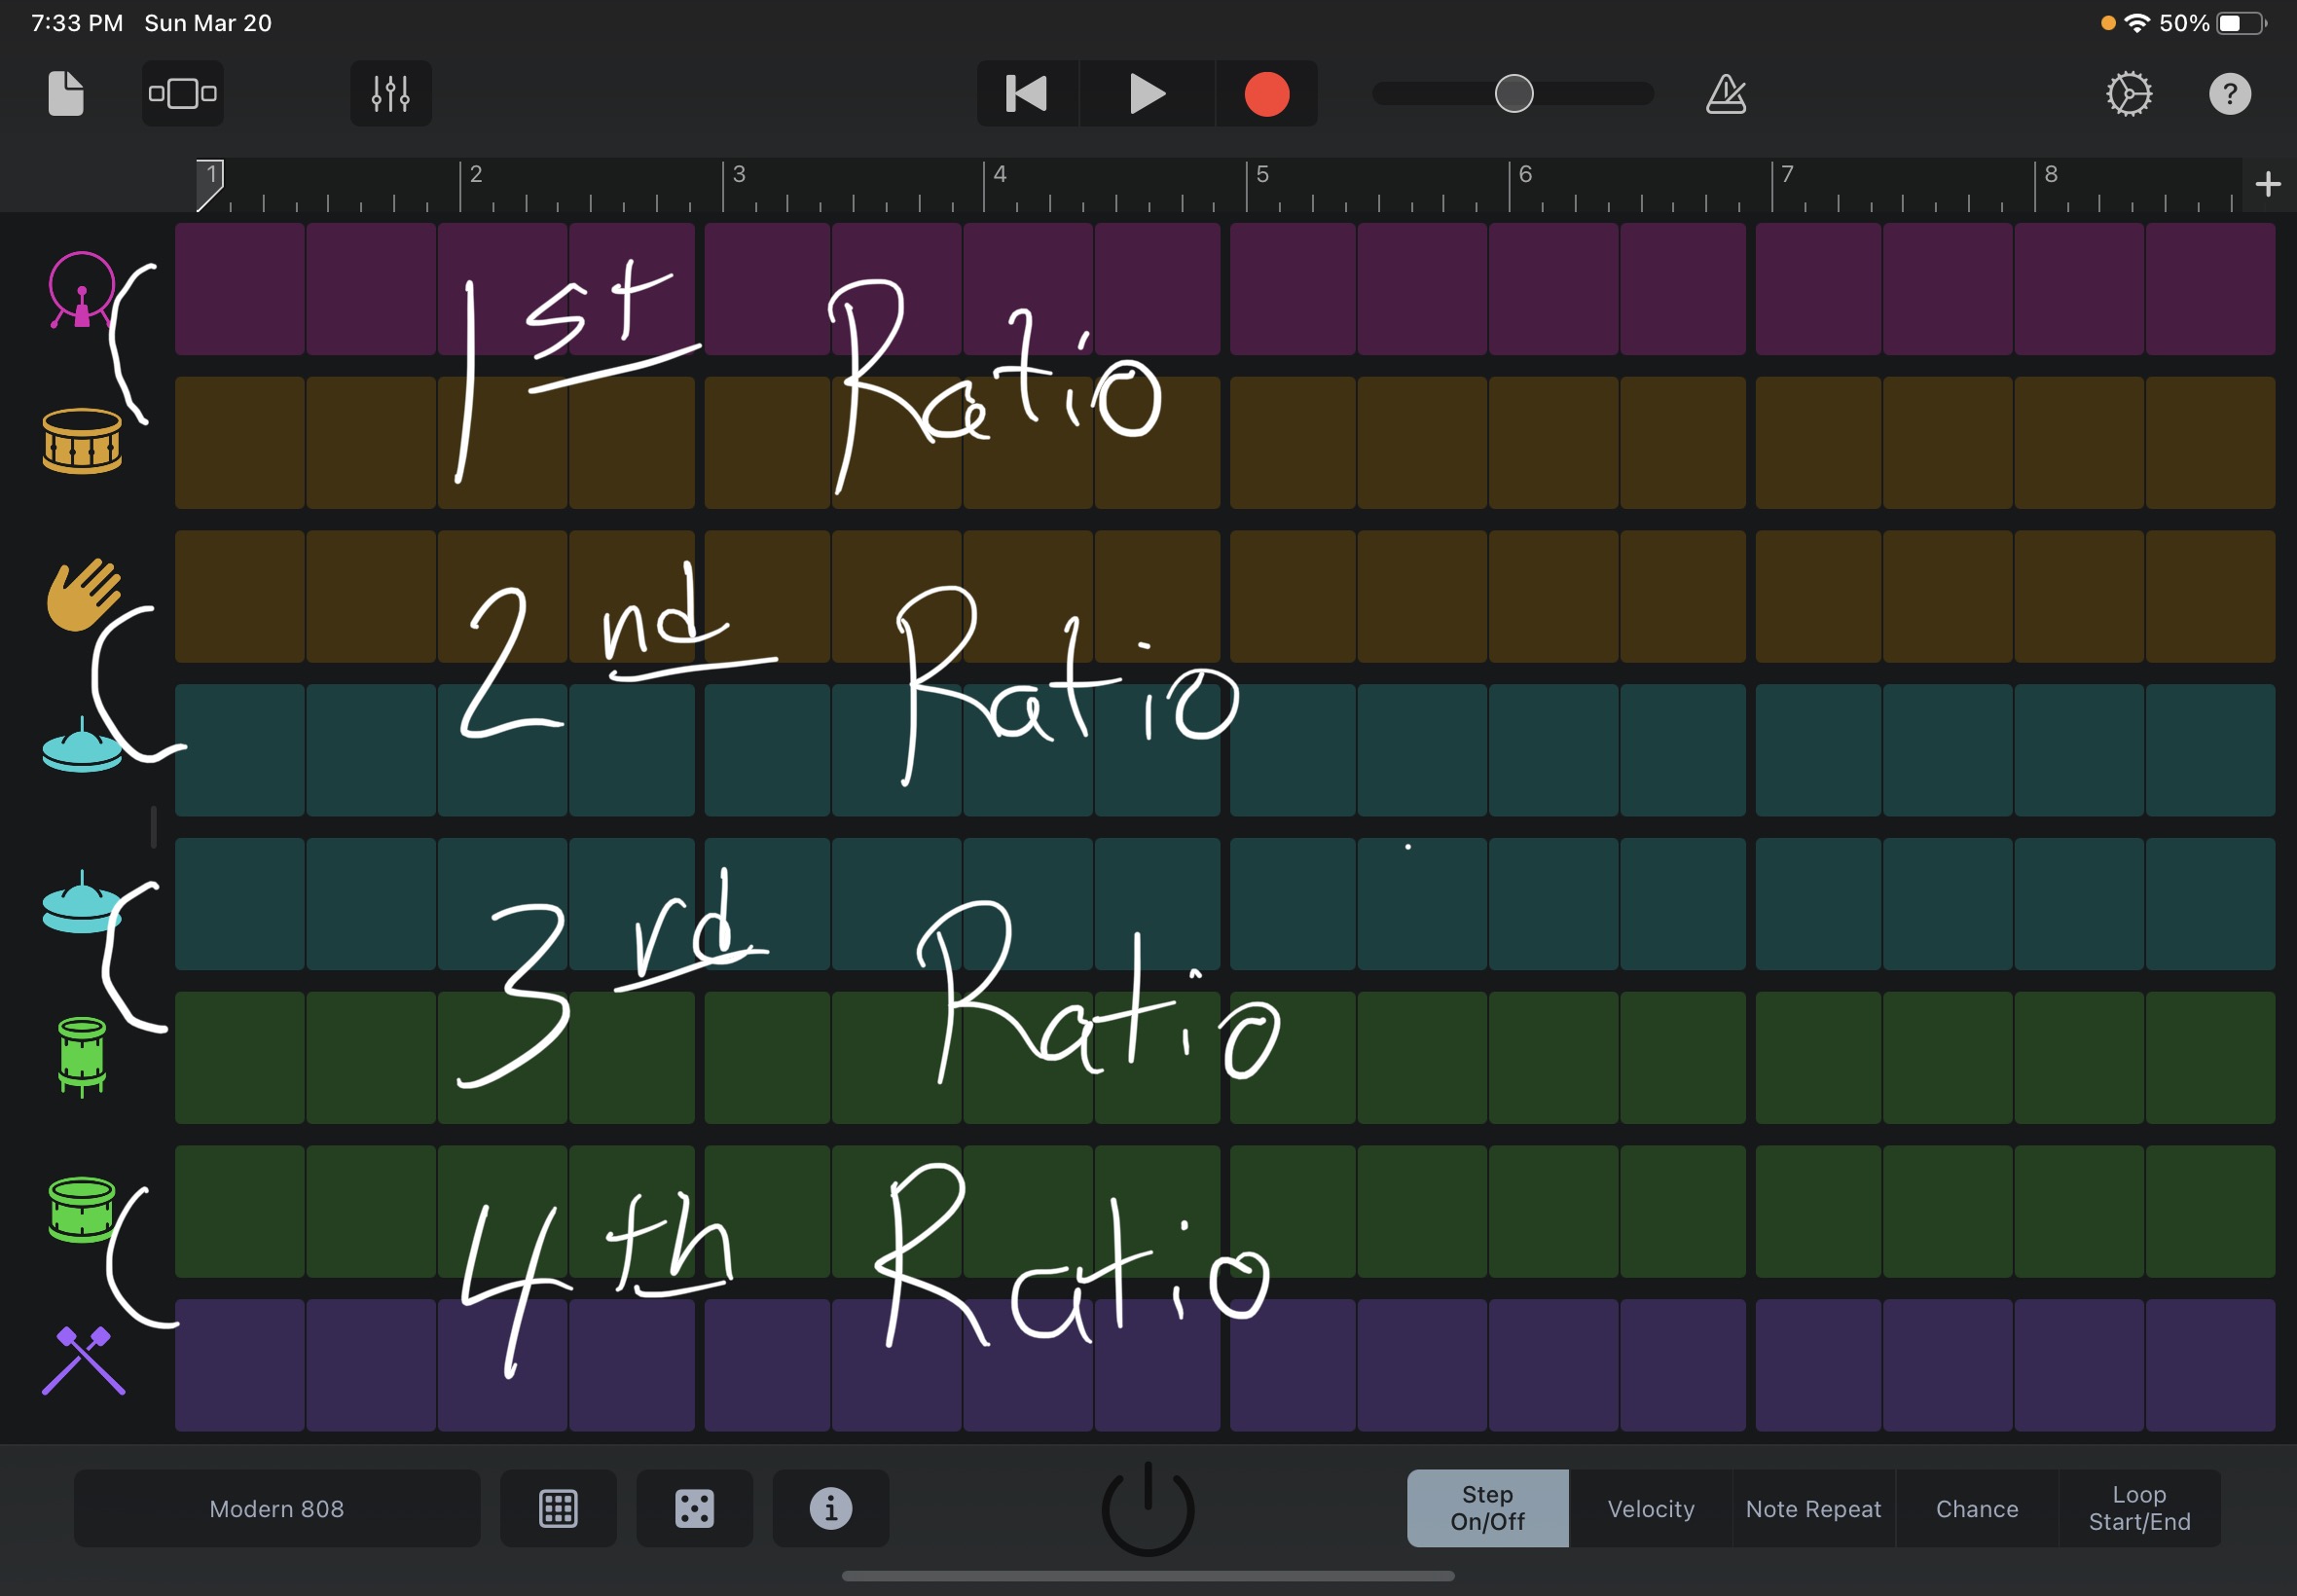 Image showing how instruments are paired together to create section for each ratio.